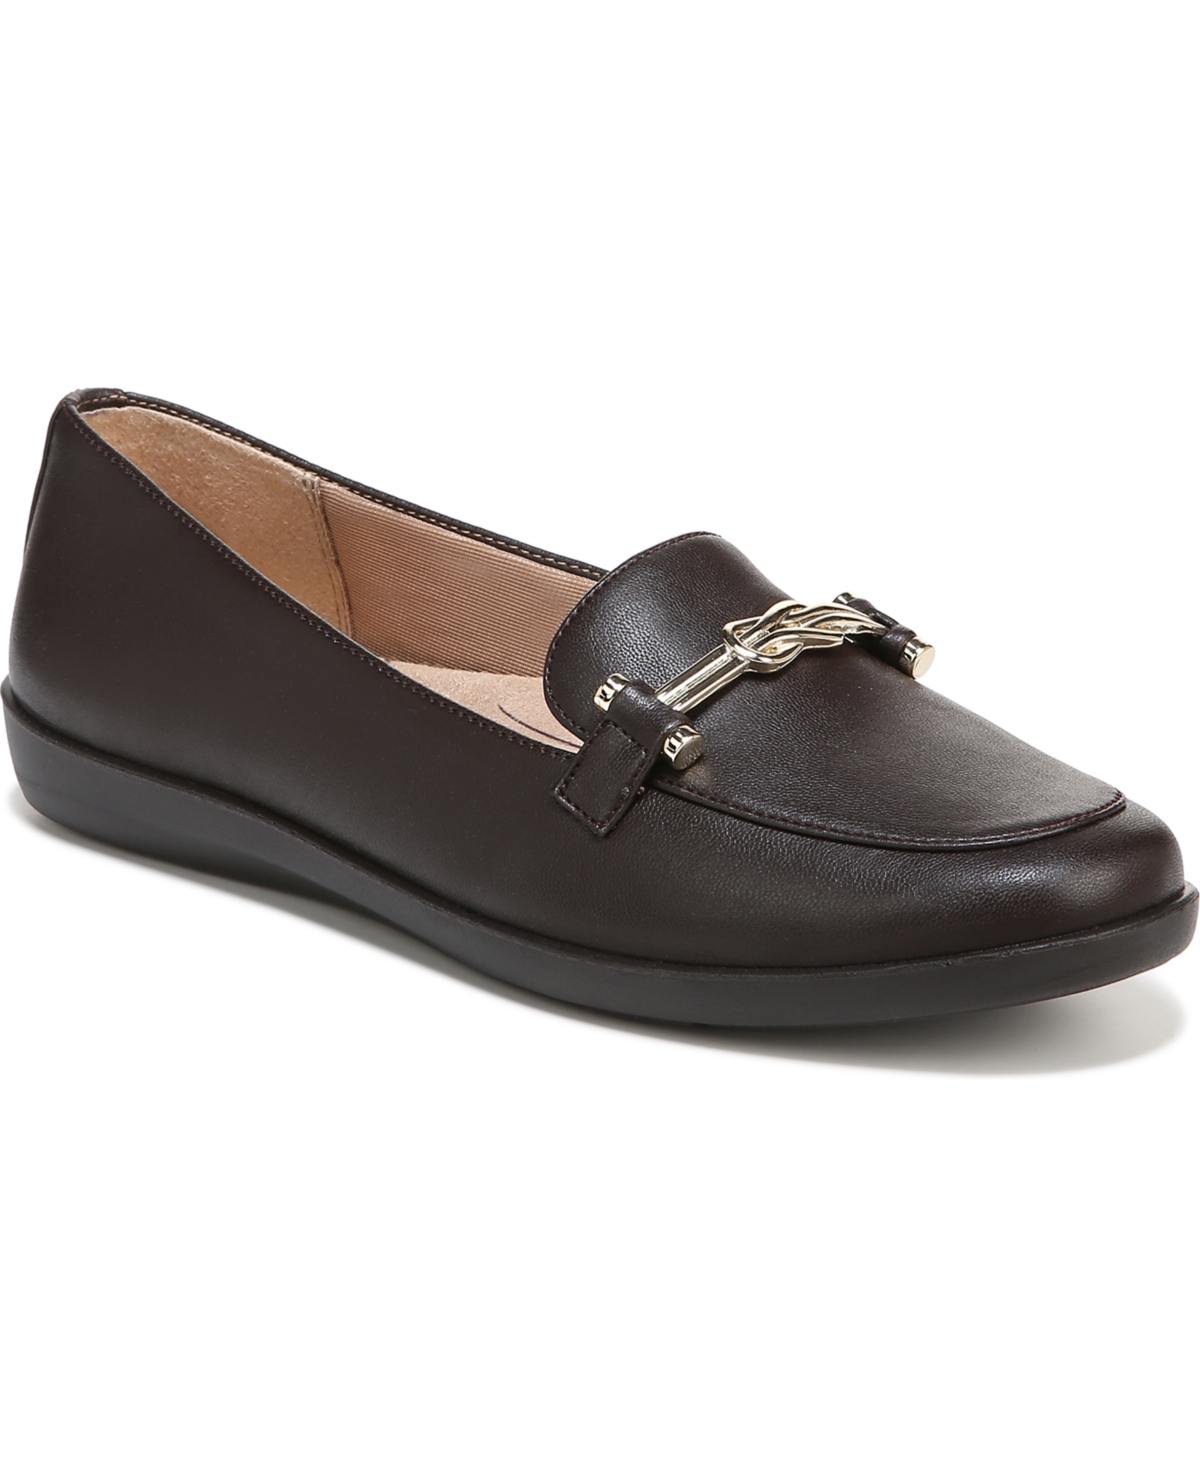 Lifestride Nominate Slip-on Loafers In Chocolate Brown Faux Leather